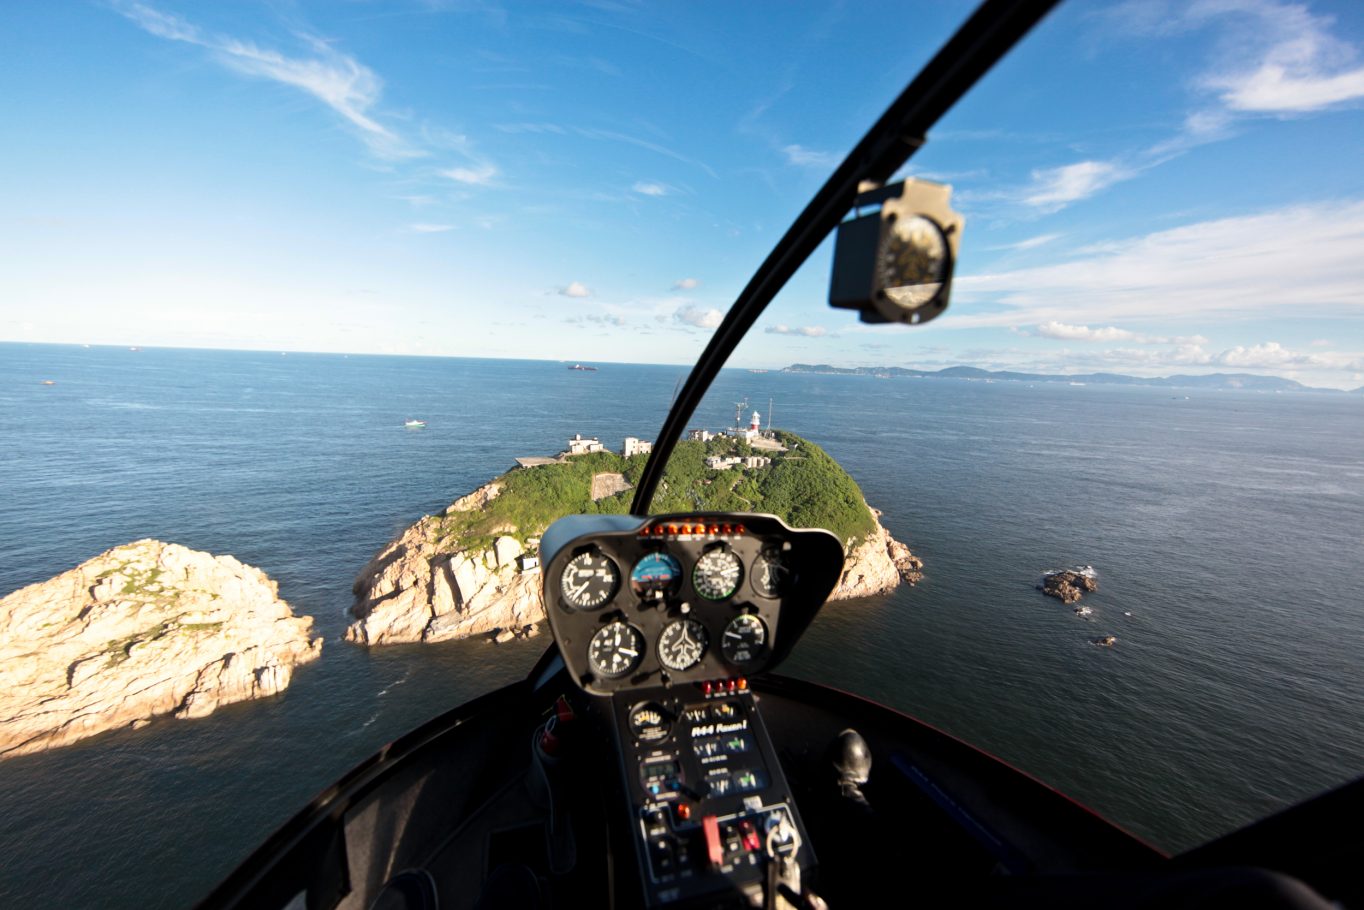 Hong Kong Photography, Aerial Photography, Landscape Photography, Helicopter